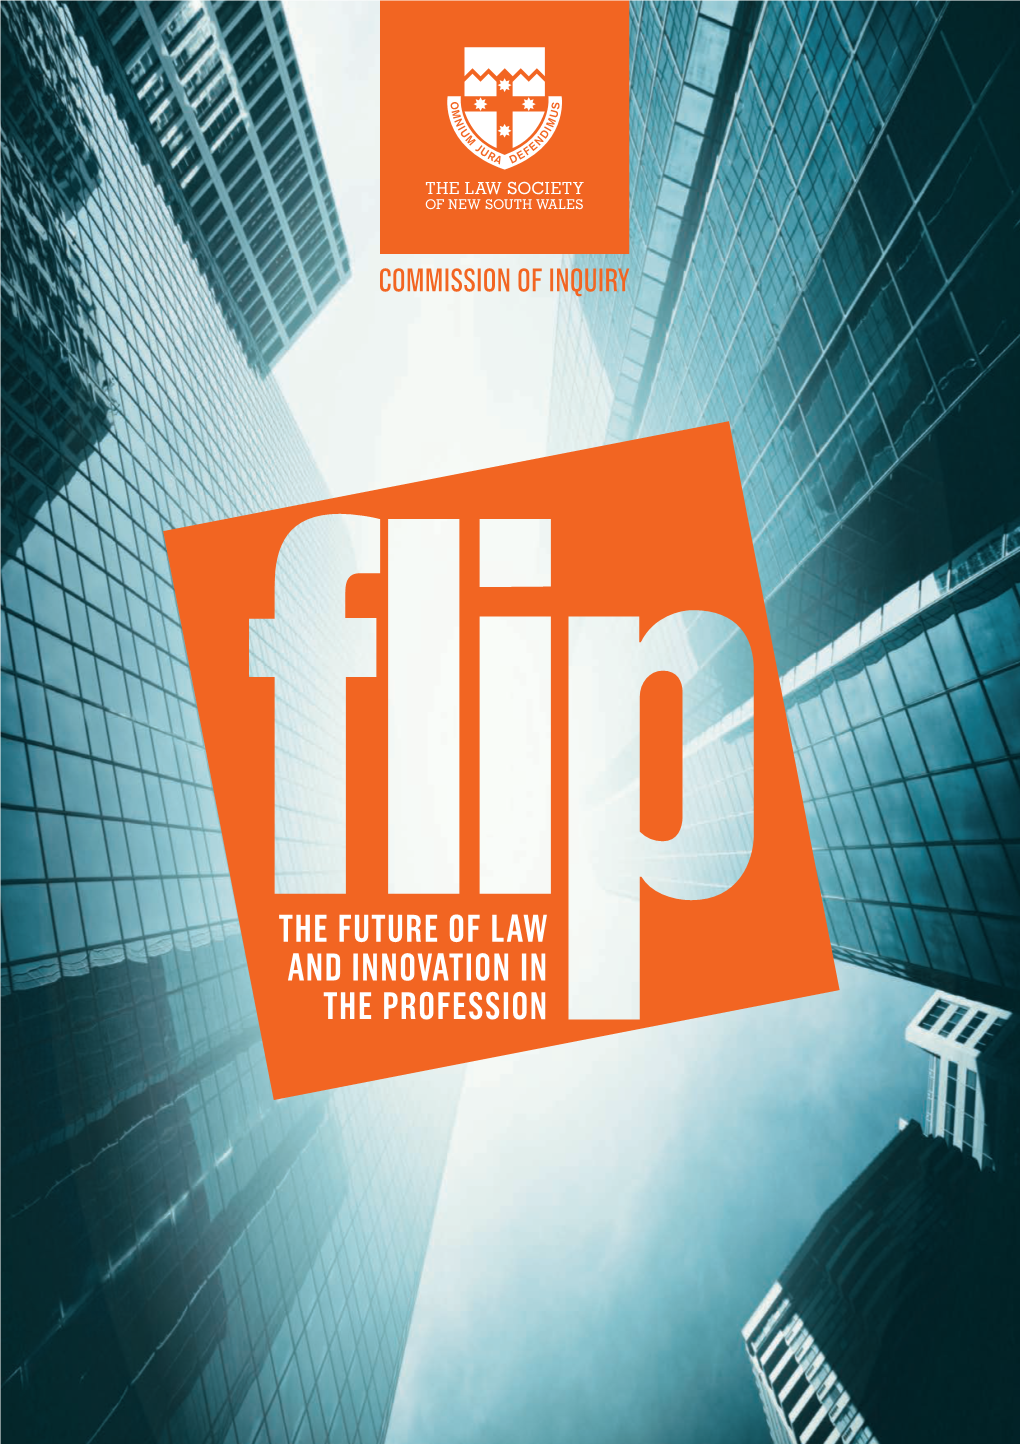 Future of Law and Innovation in the Profession (FLIP) Report